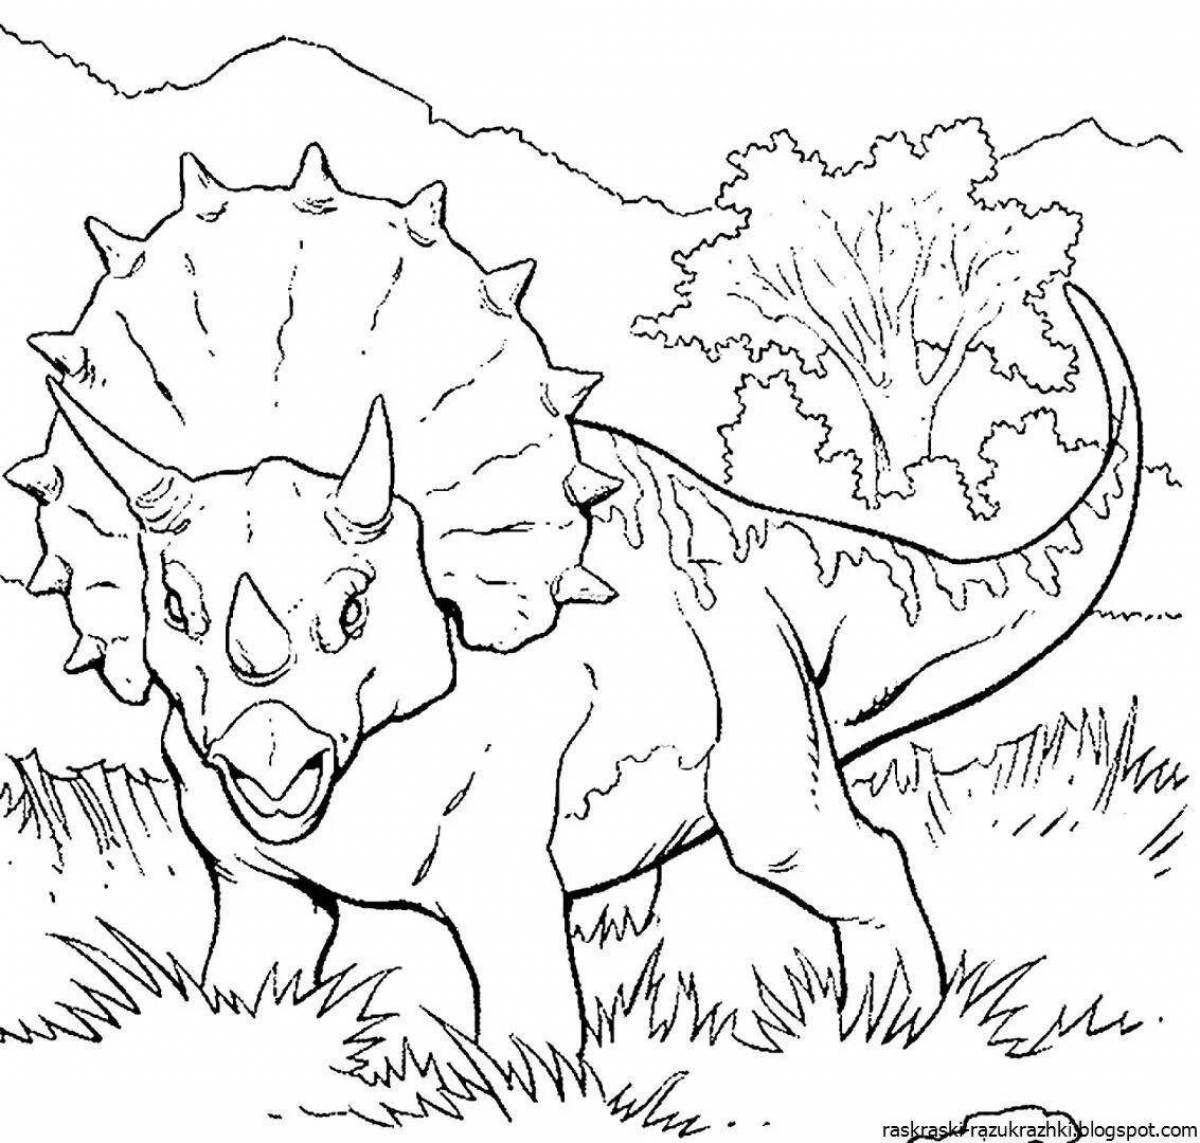 Fun dinosaur coloring book for 5-6 year old boys